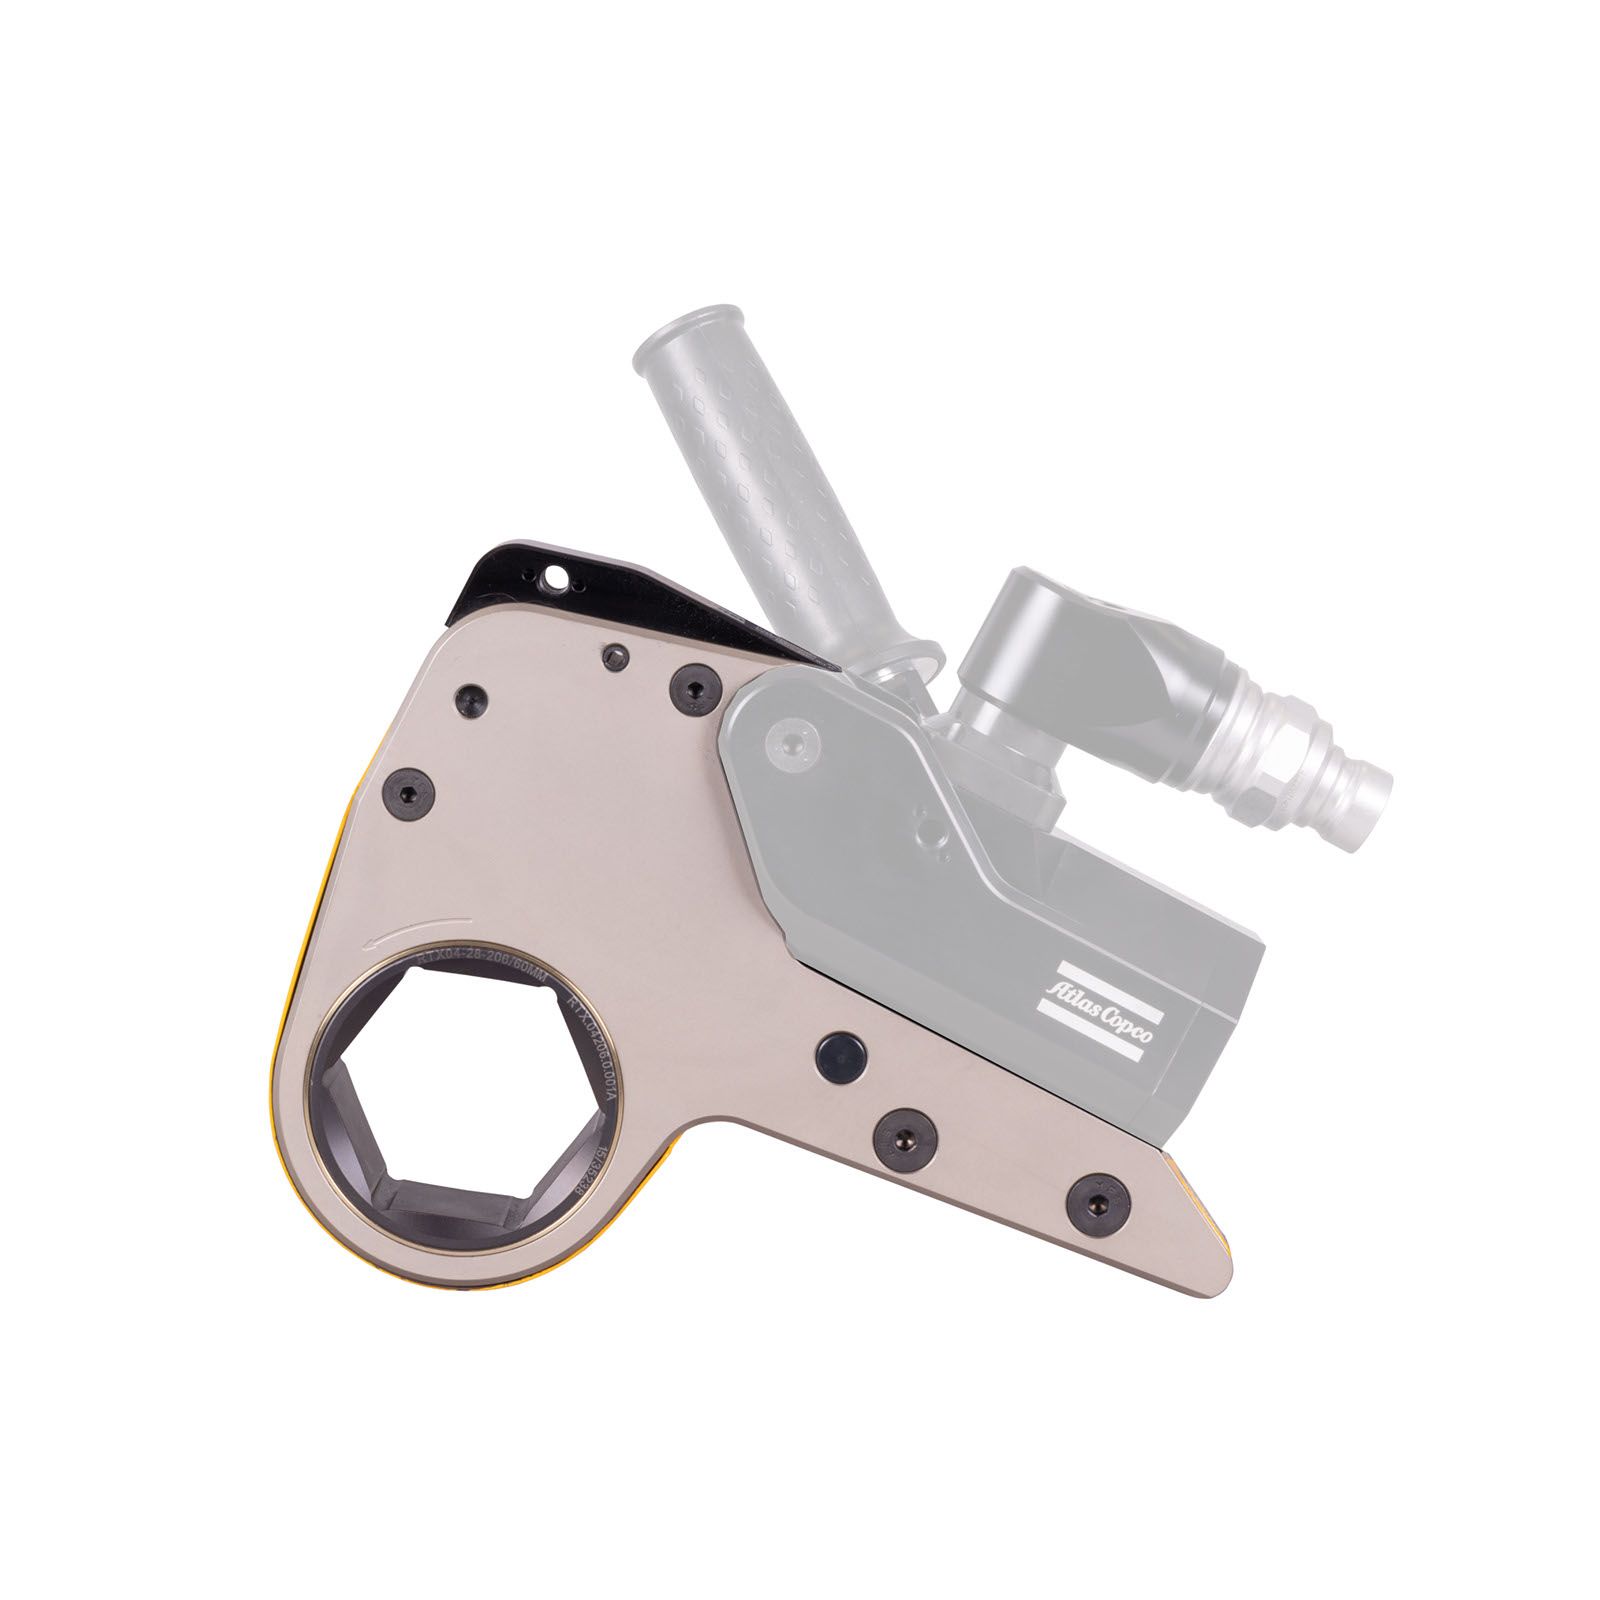 Ratchet Links for Hydraulic Torque Wrenches - TFX foto de producto